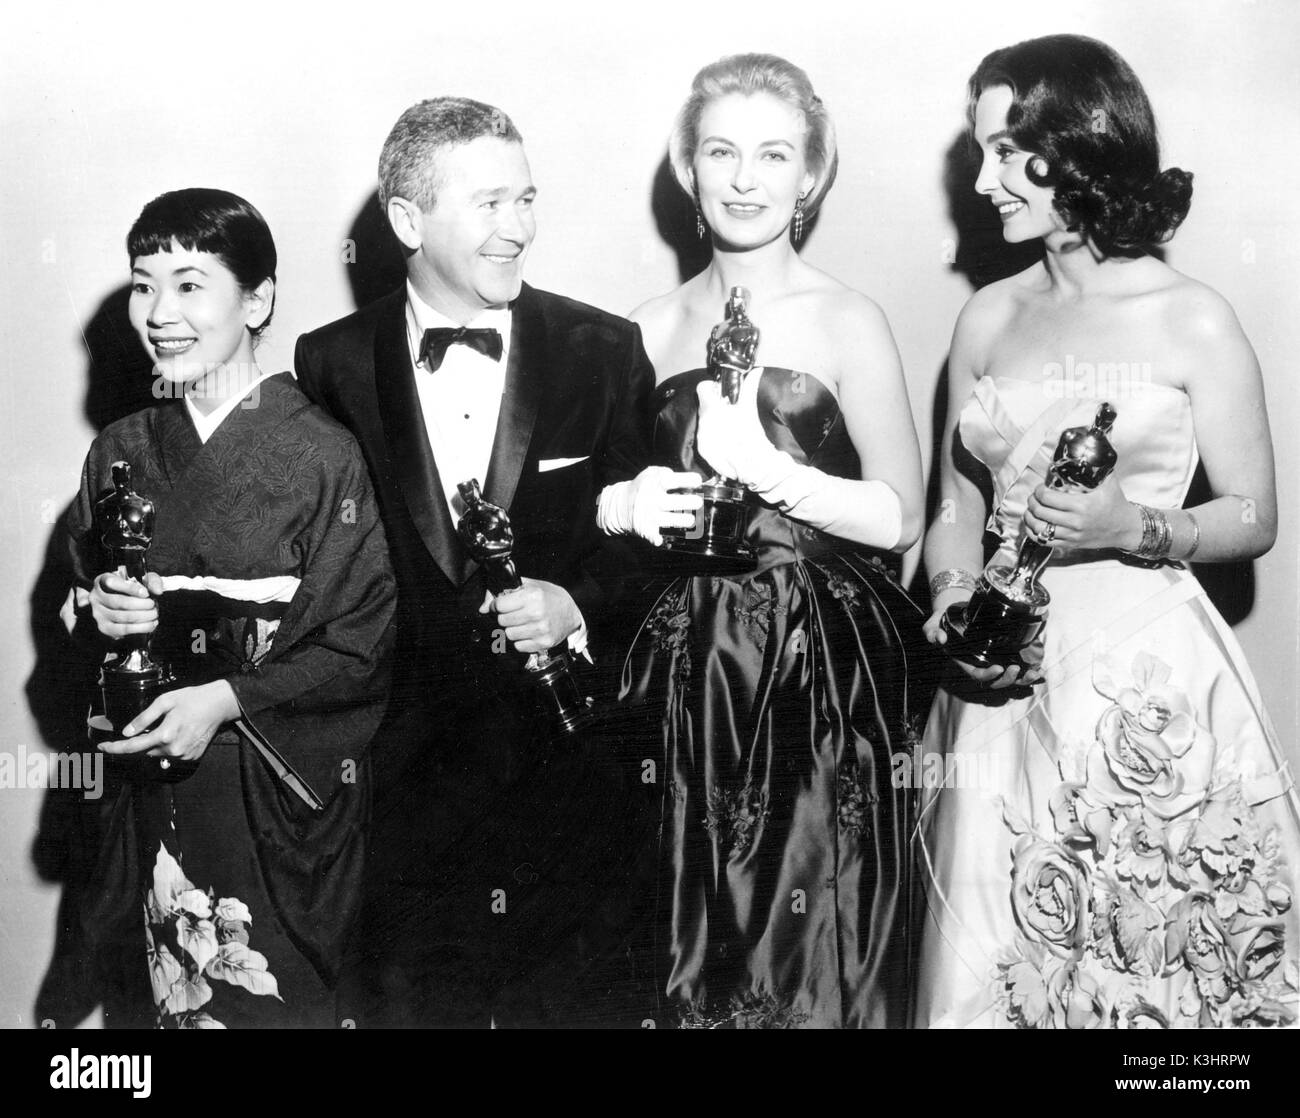 ACADEMY AWARDS CEREMONY 1958 Oscar for best supporting actress - MIIYOSHI UMEKI in SAYONARA Oscar for best supporting actor RED BUTTONS Oscar for best actress - JOANNE WOODWARD in THE THREE FACES OF EVE JEAN SIMMONS Stock Photo